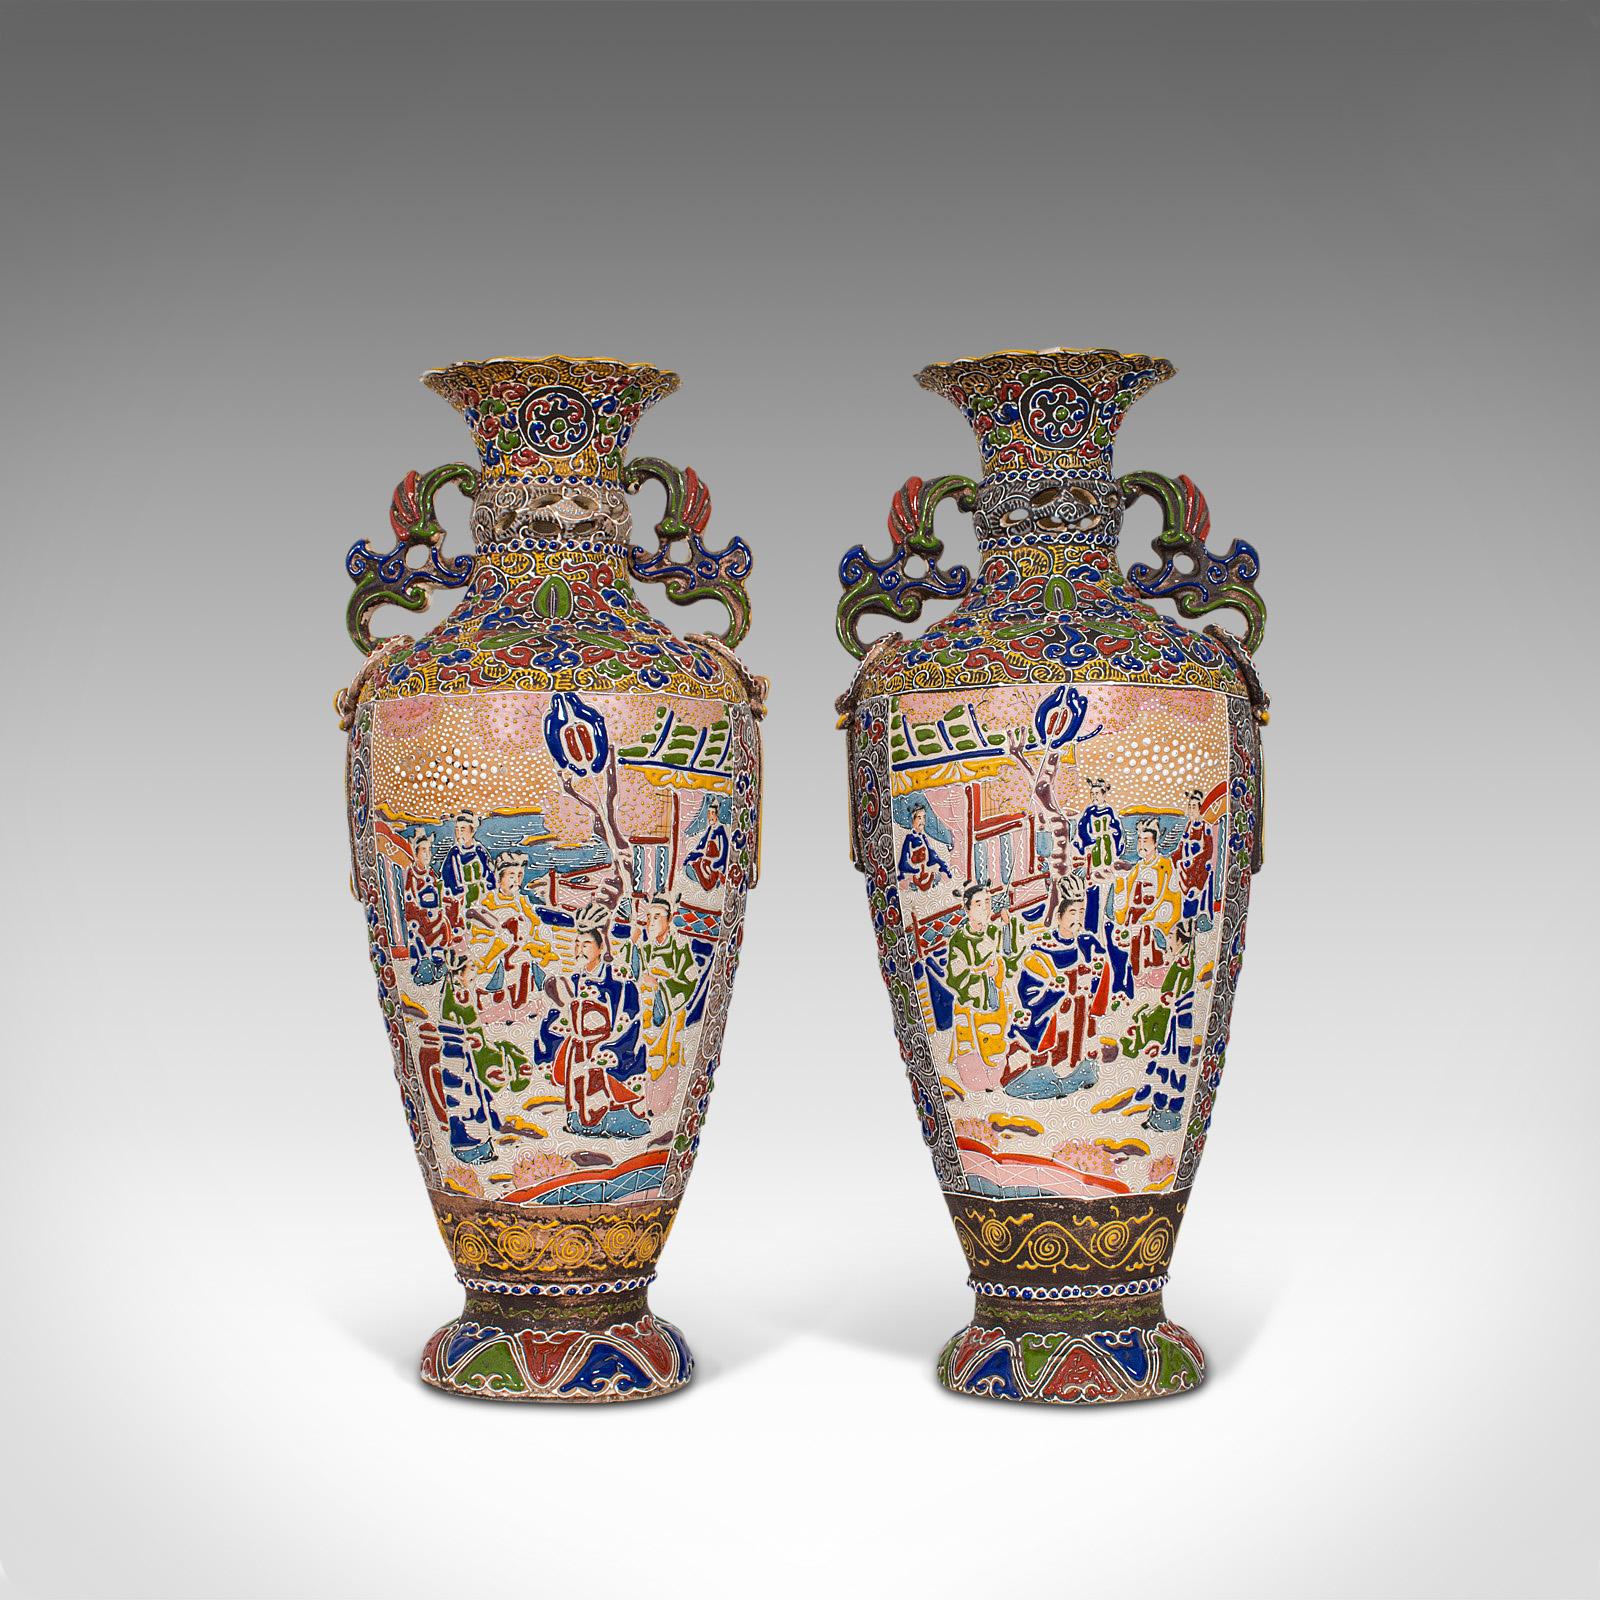 This is a pair of tall antique Satsuma vases. A Japanese, ceramic decorative urn with moriage finish, dating to the late 19th century, circa 1900.

Wonderful, antique Japanese ceramic art
Displaying a desirable aged patina, both in good